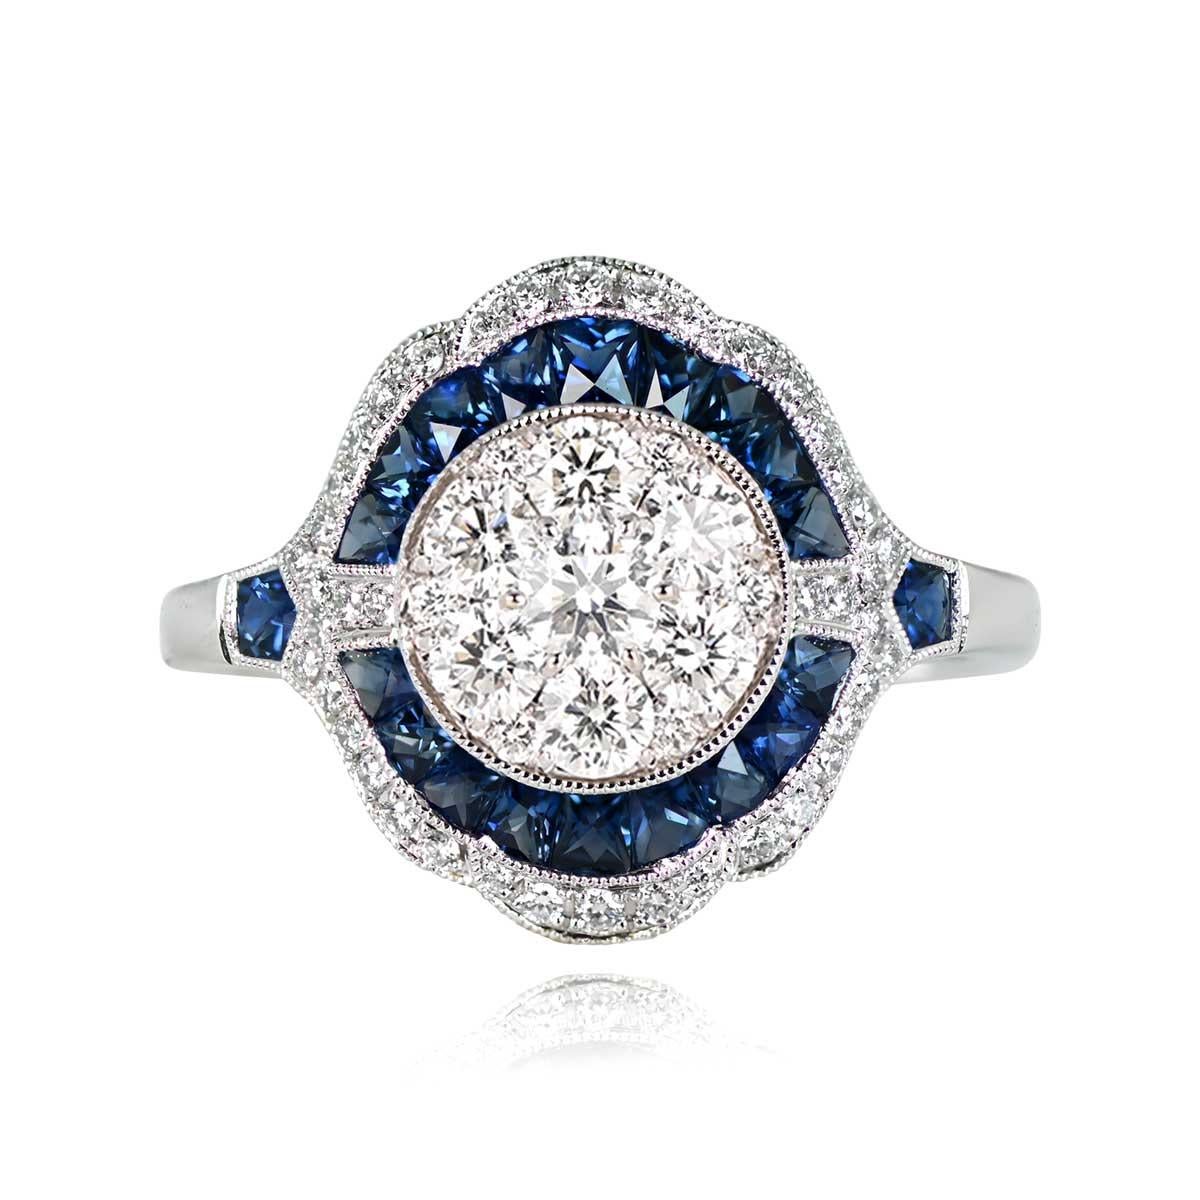 A mesmerizing Art Deco-style platinum ring adorned with a captivating array of sapphires and diamonds. The central focus is a cluster of round brilliant-cut diamonds, encircled by a double halo composed of natural blue French-cut sapphires and